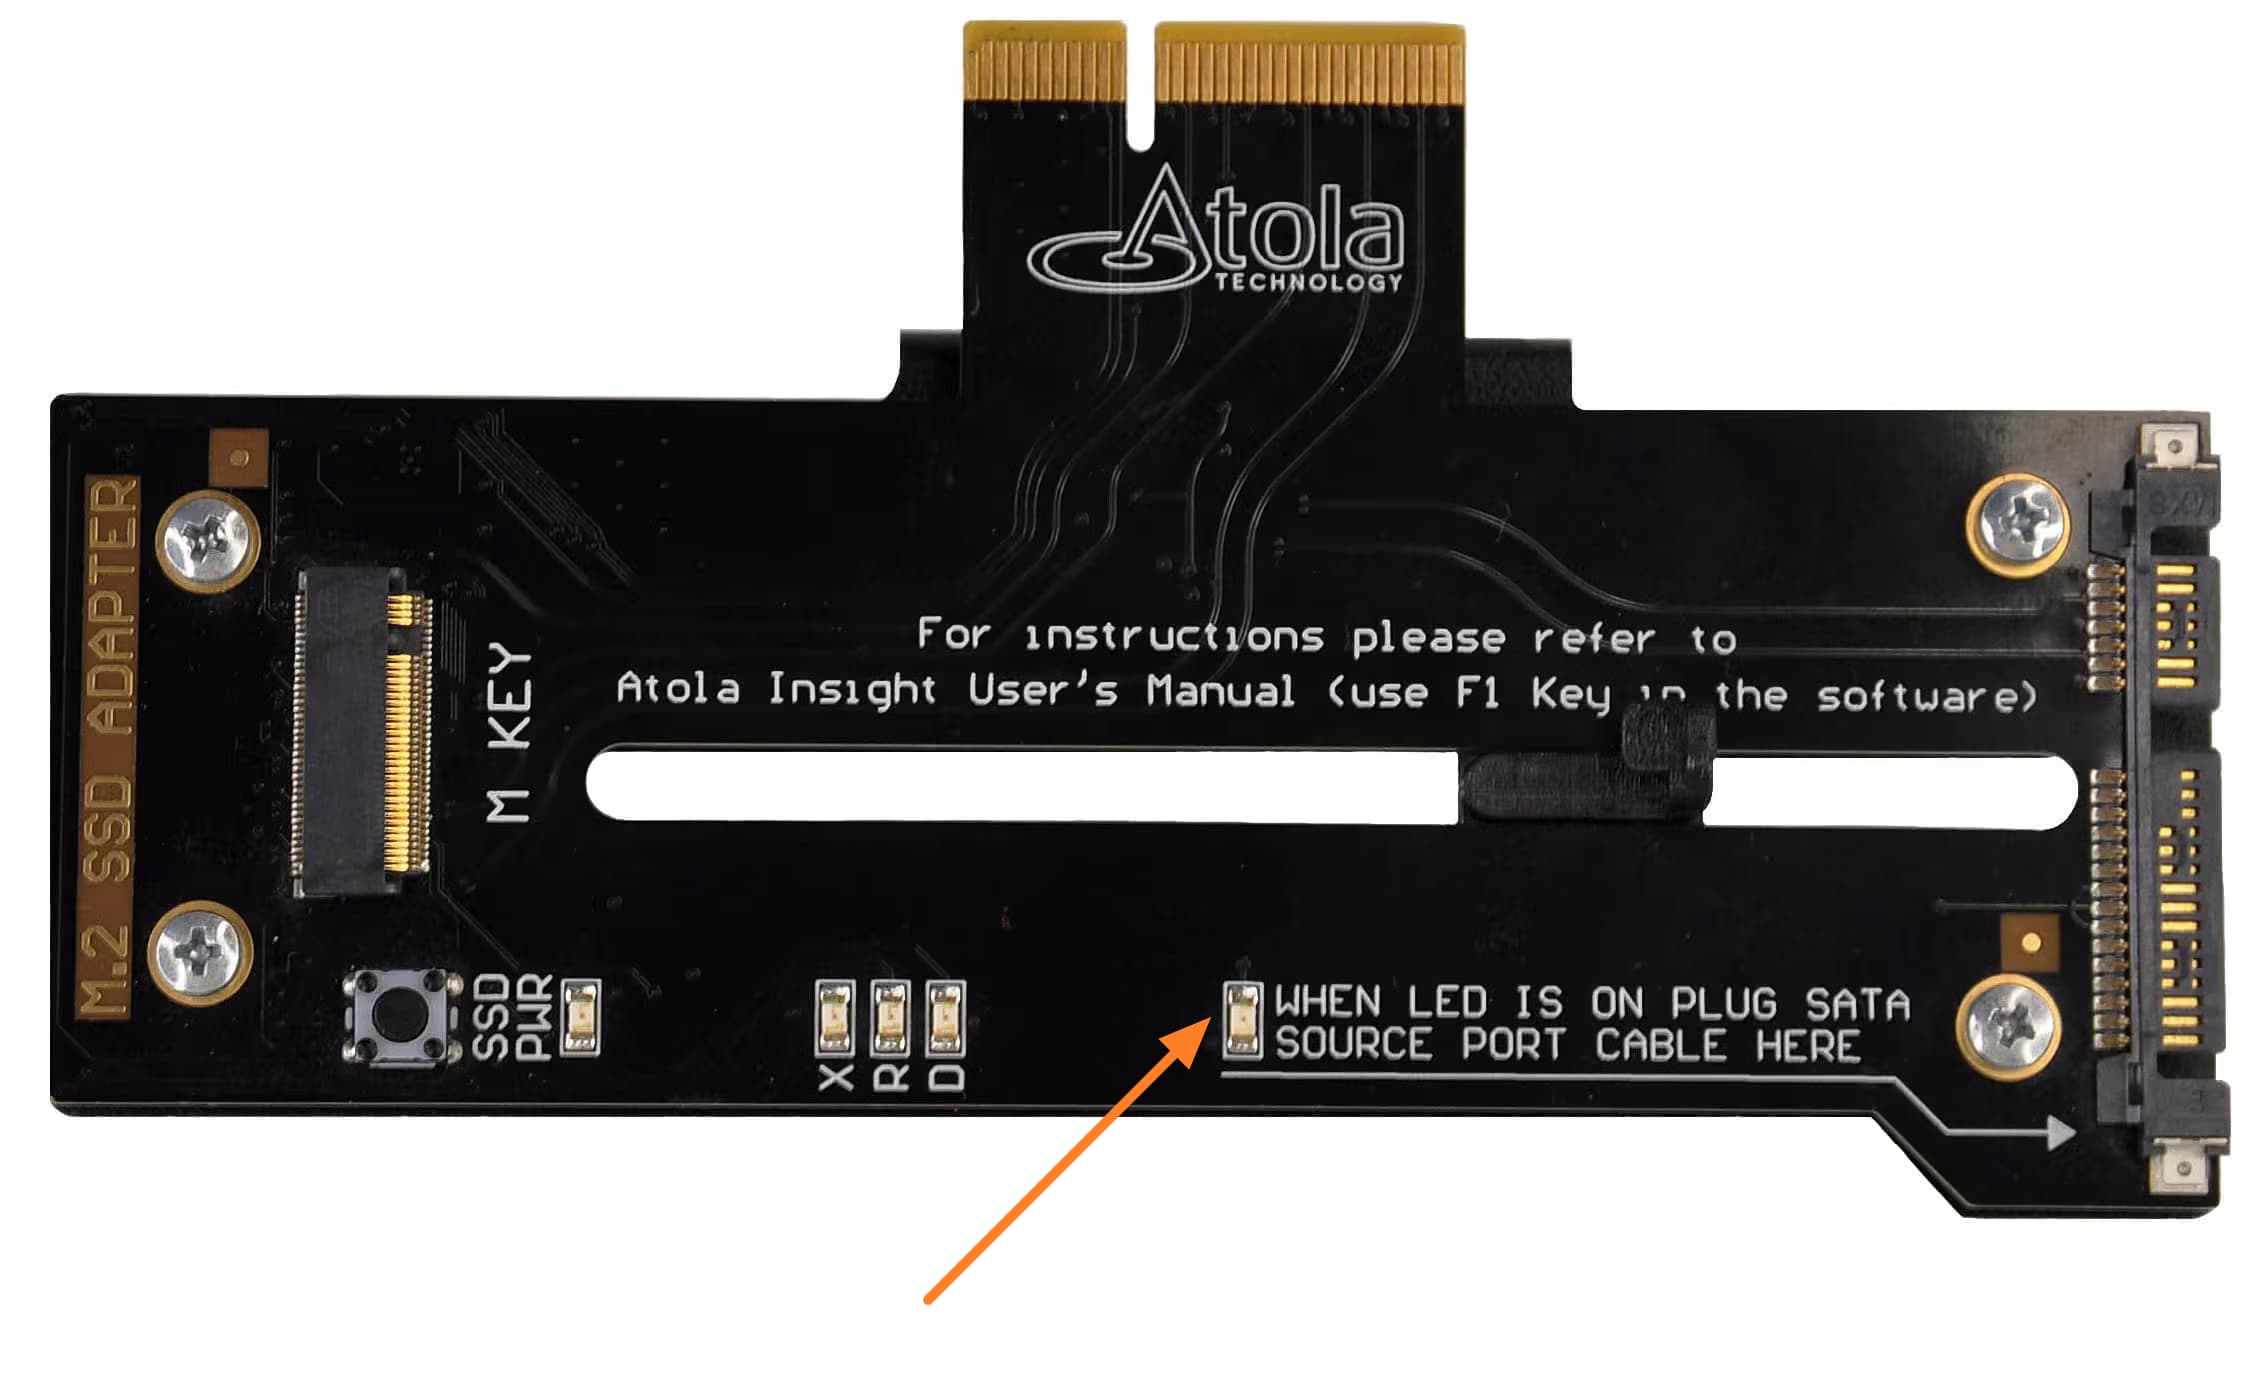 LED indicator on the M.2 SSD extension module.